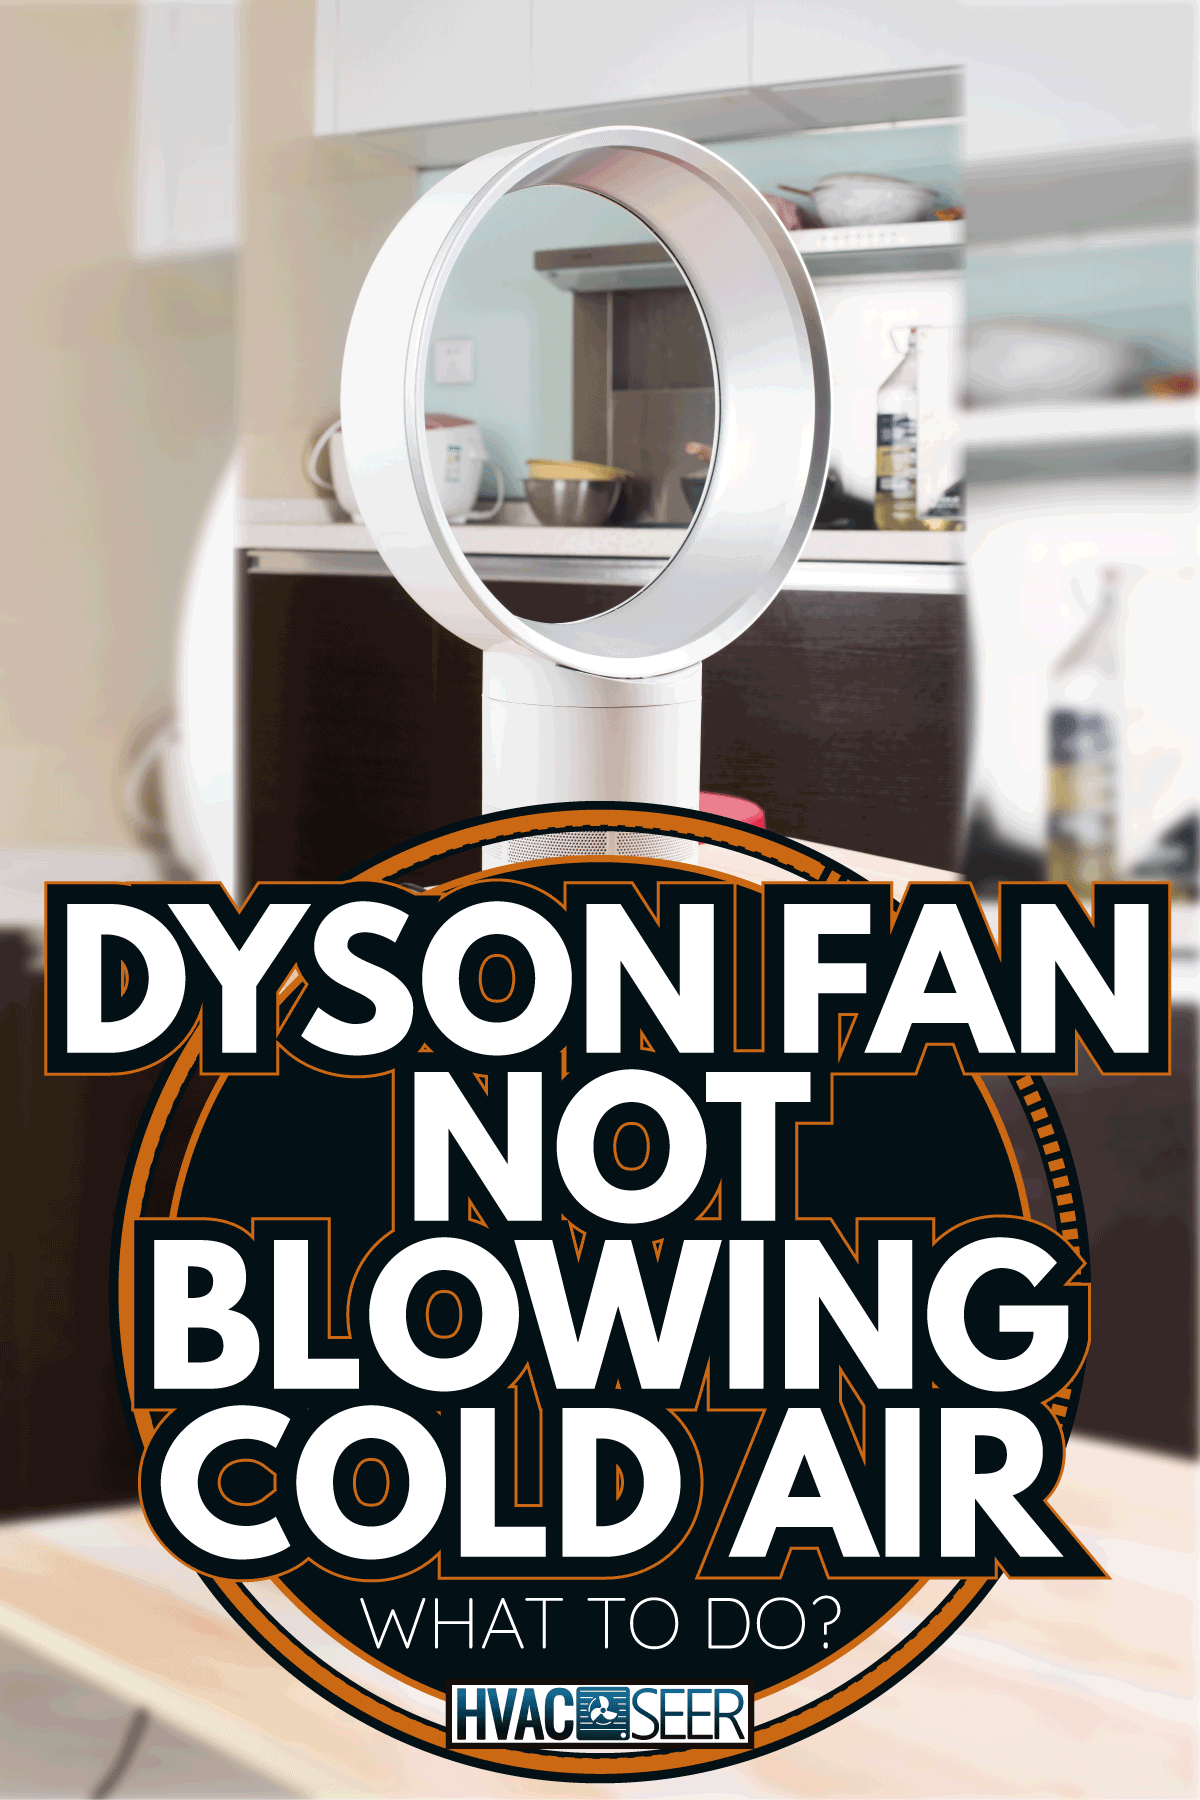 Dyson Air Multiplier. It is a uniquely designed fan with no external blades. Dyson Fan Not Blowing Cold Air—What To Do